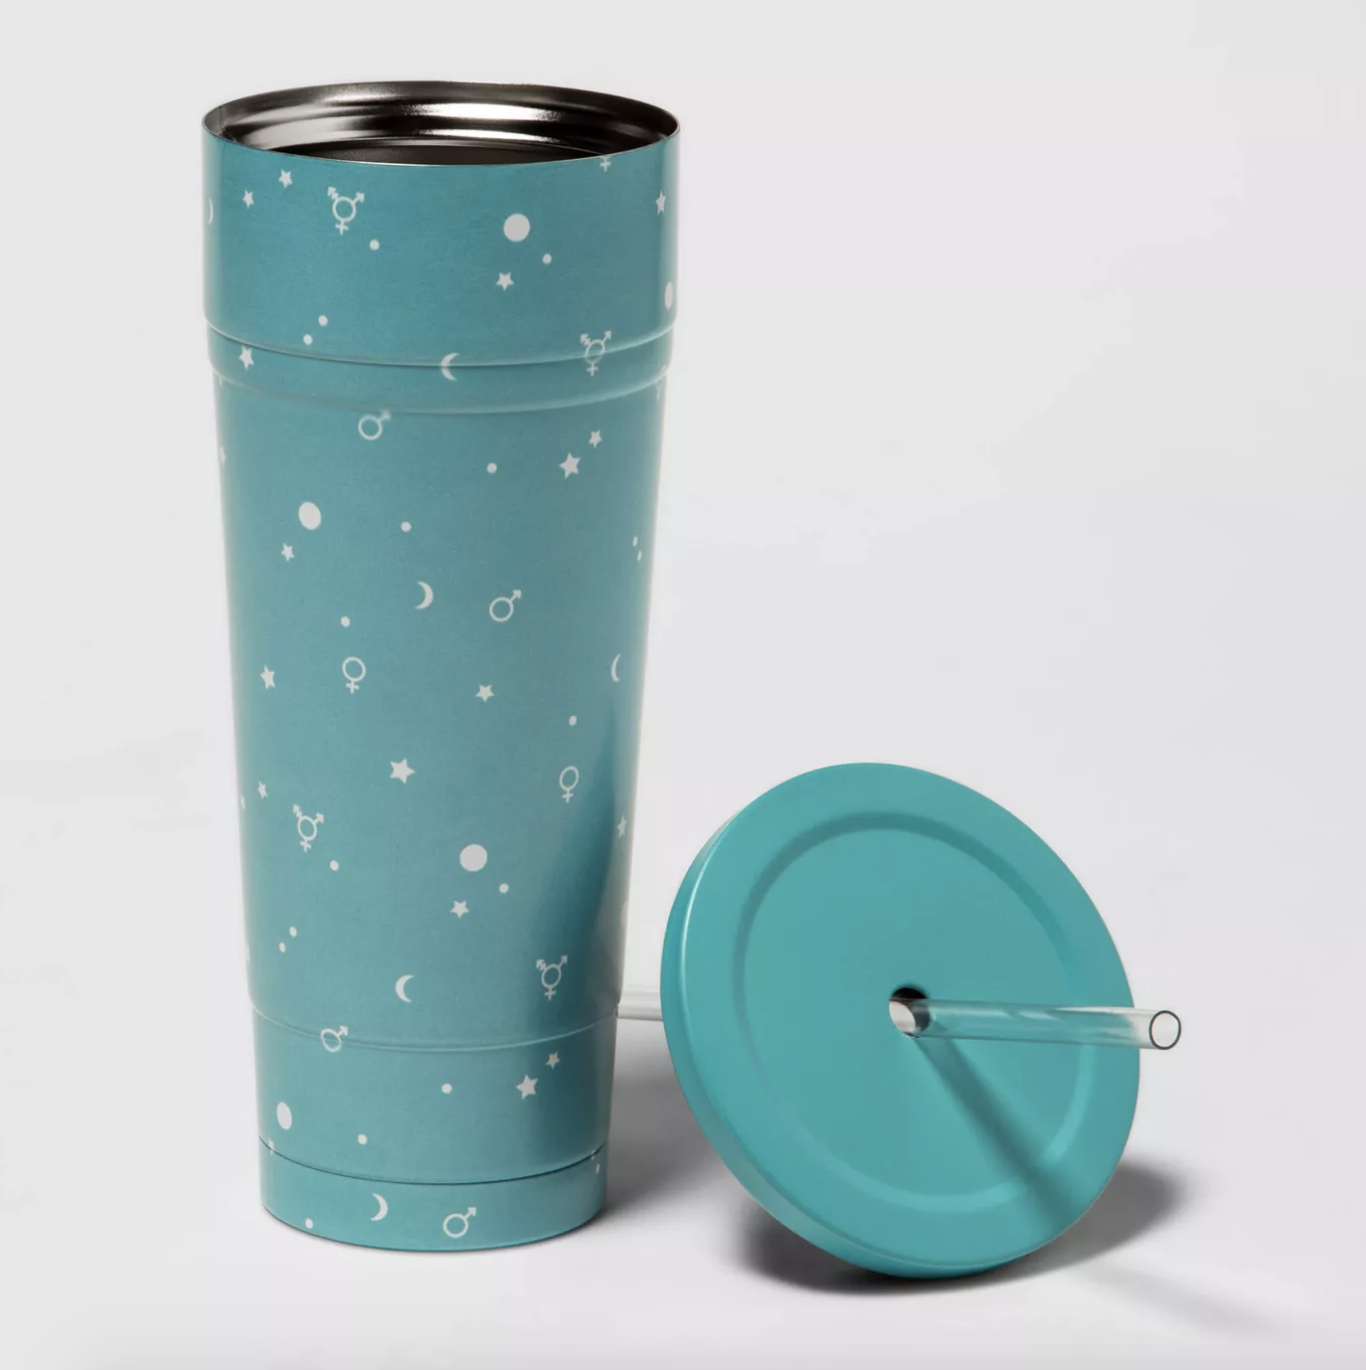 a blue tumbler cup with white stars and moon icons on it